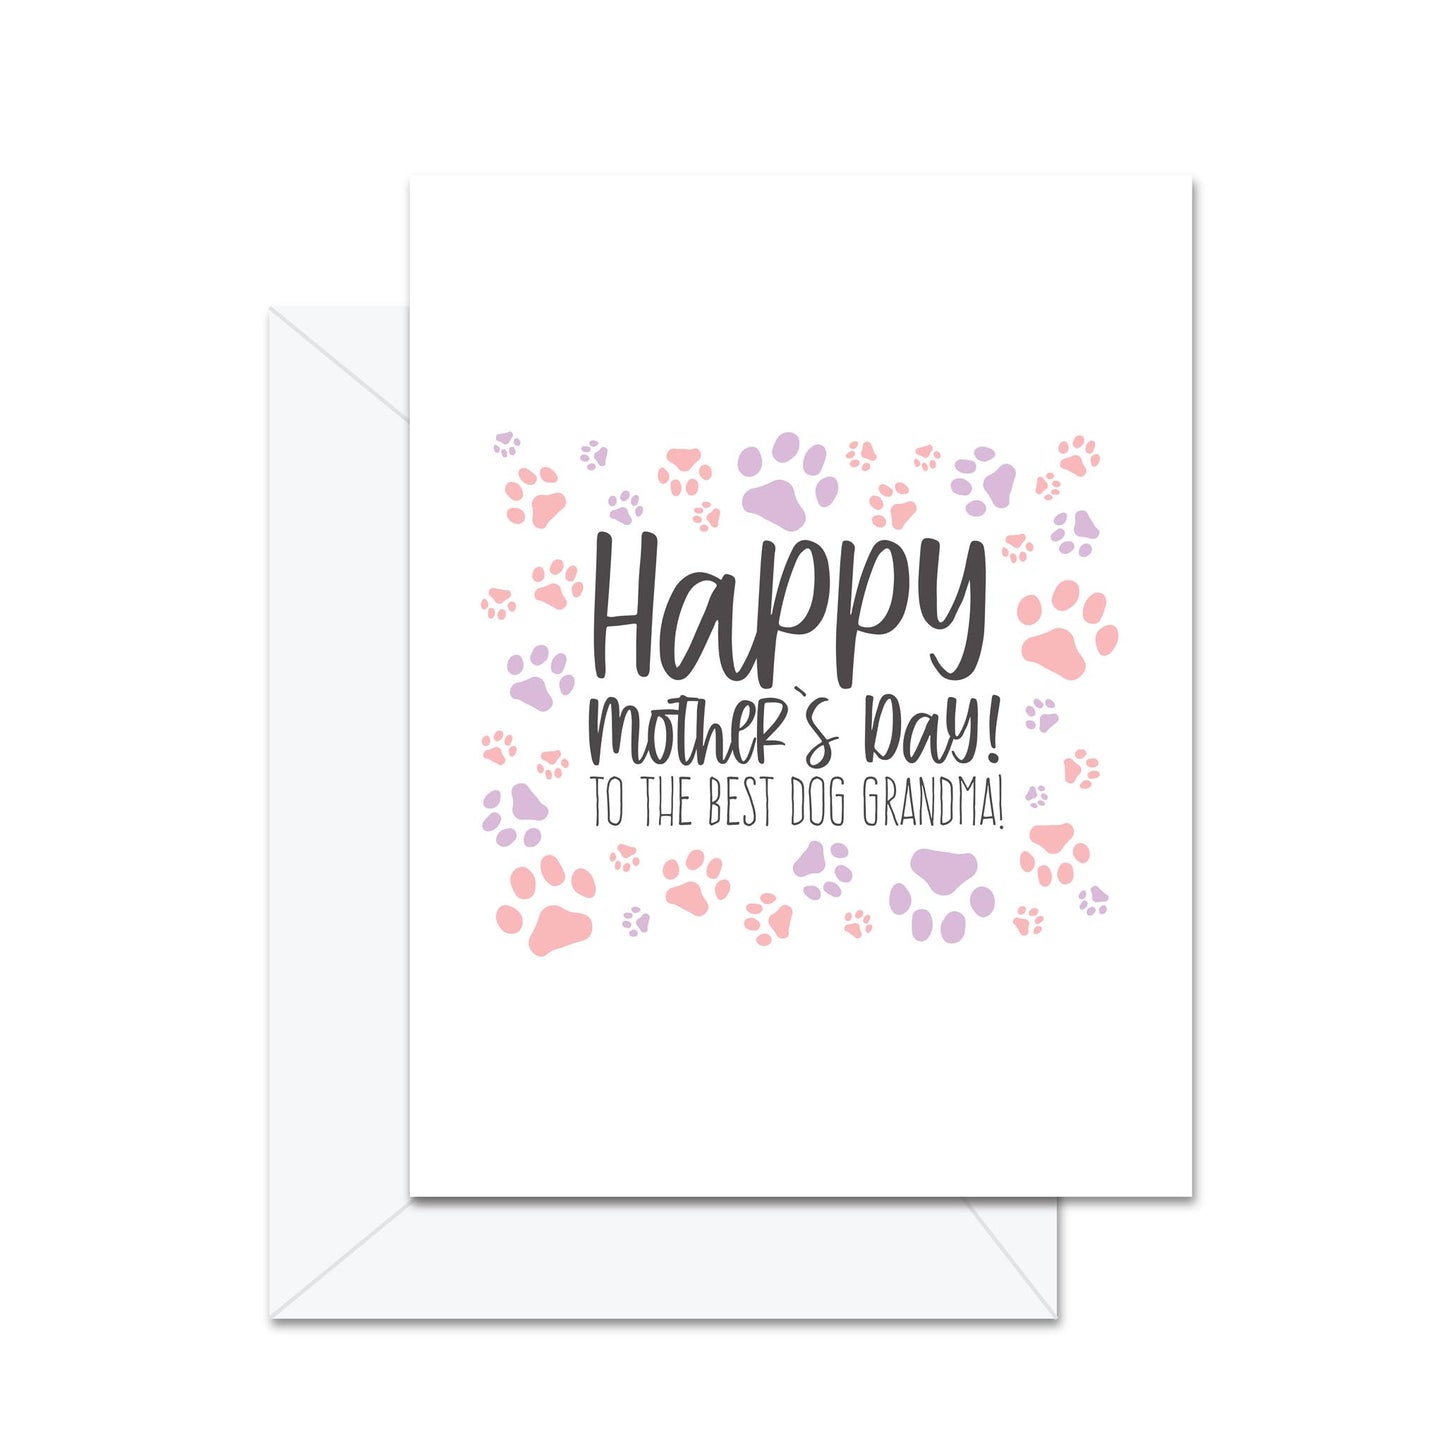 Happy Mother's Day! To The Best Dog Grandma! - Greeting Card